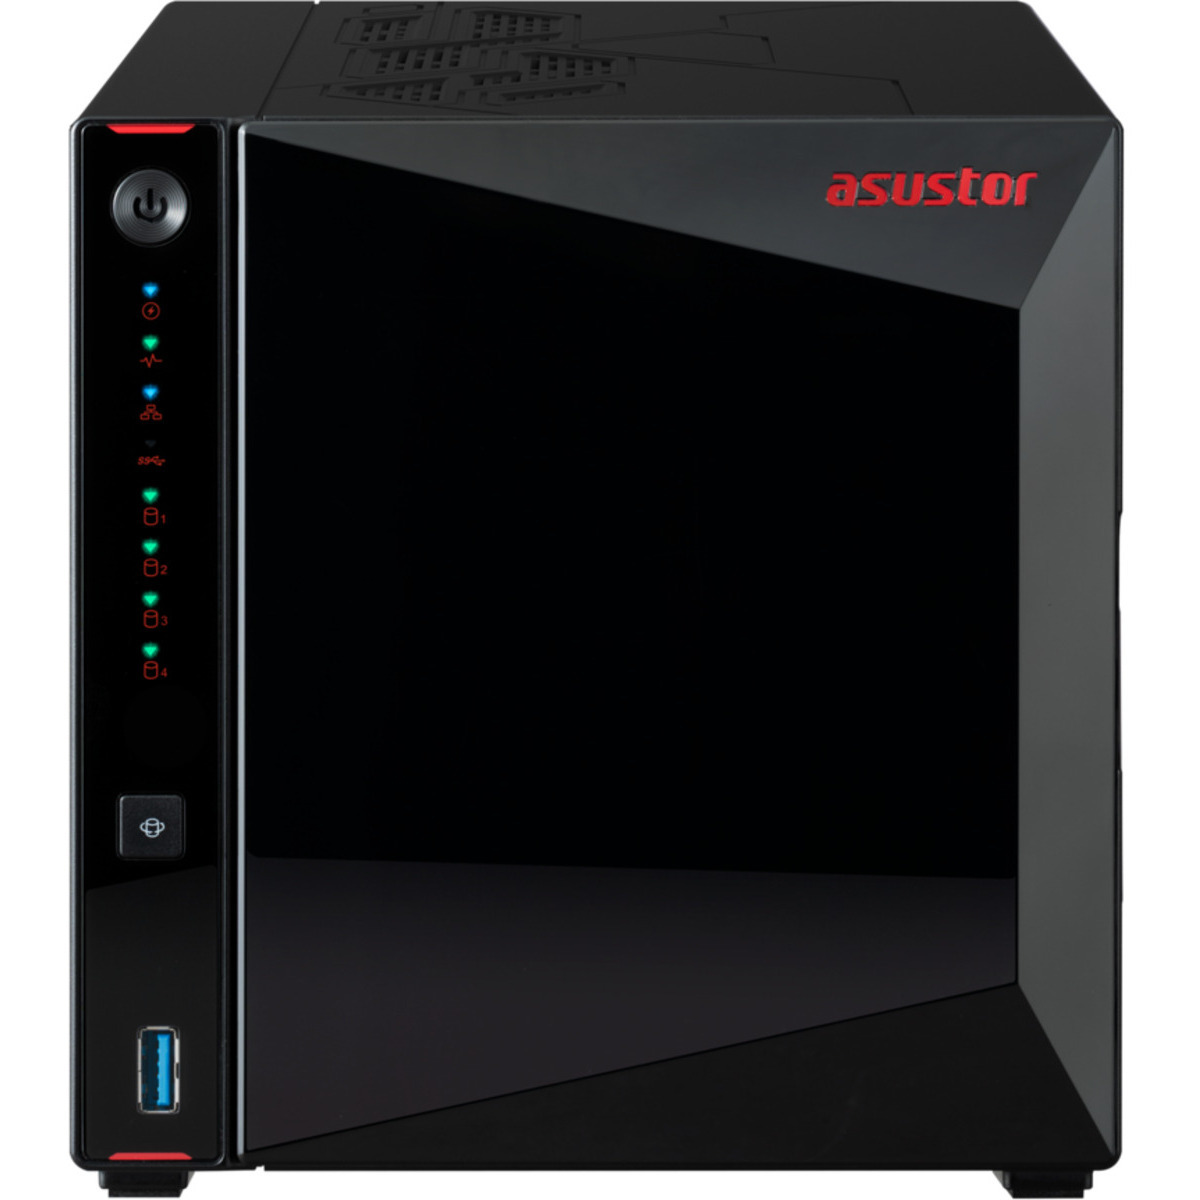 buy ASUSTOR Nimbustor 4 Gen2 AS5404T 88tb Desktop NAS - Network Attached Storage Device 4x22000gb Western Digital Red Pro WD221KFGX 3.5 7200rpm SATA 6Gb/s HDD NAS Class Drives Installed - Burn-In Tested - ON SALE - FREE RAM UPGRADE - nas headquarters buy network attached storage server device das new raid-5 free shipping simply usa Nimbustor 4 Gen2 AS5404T